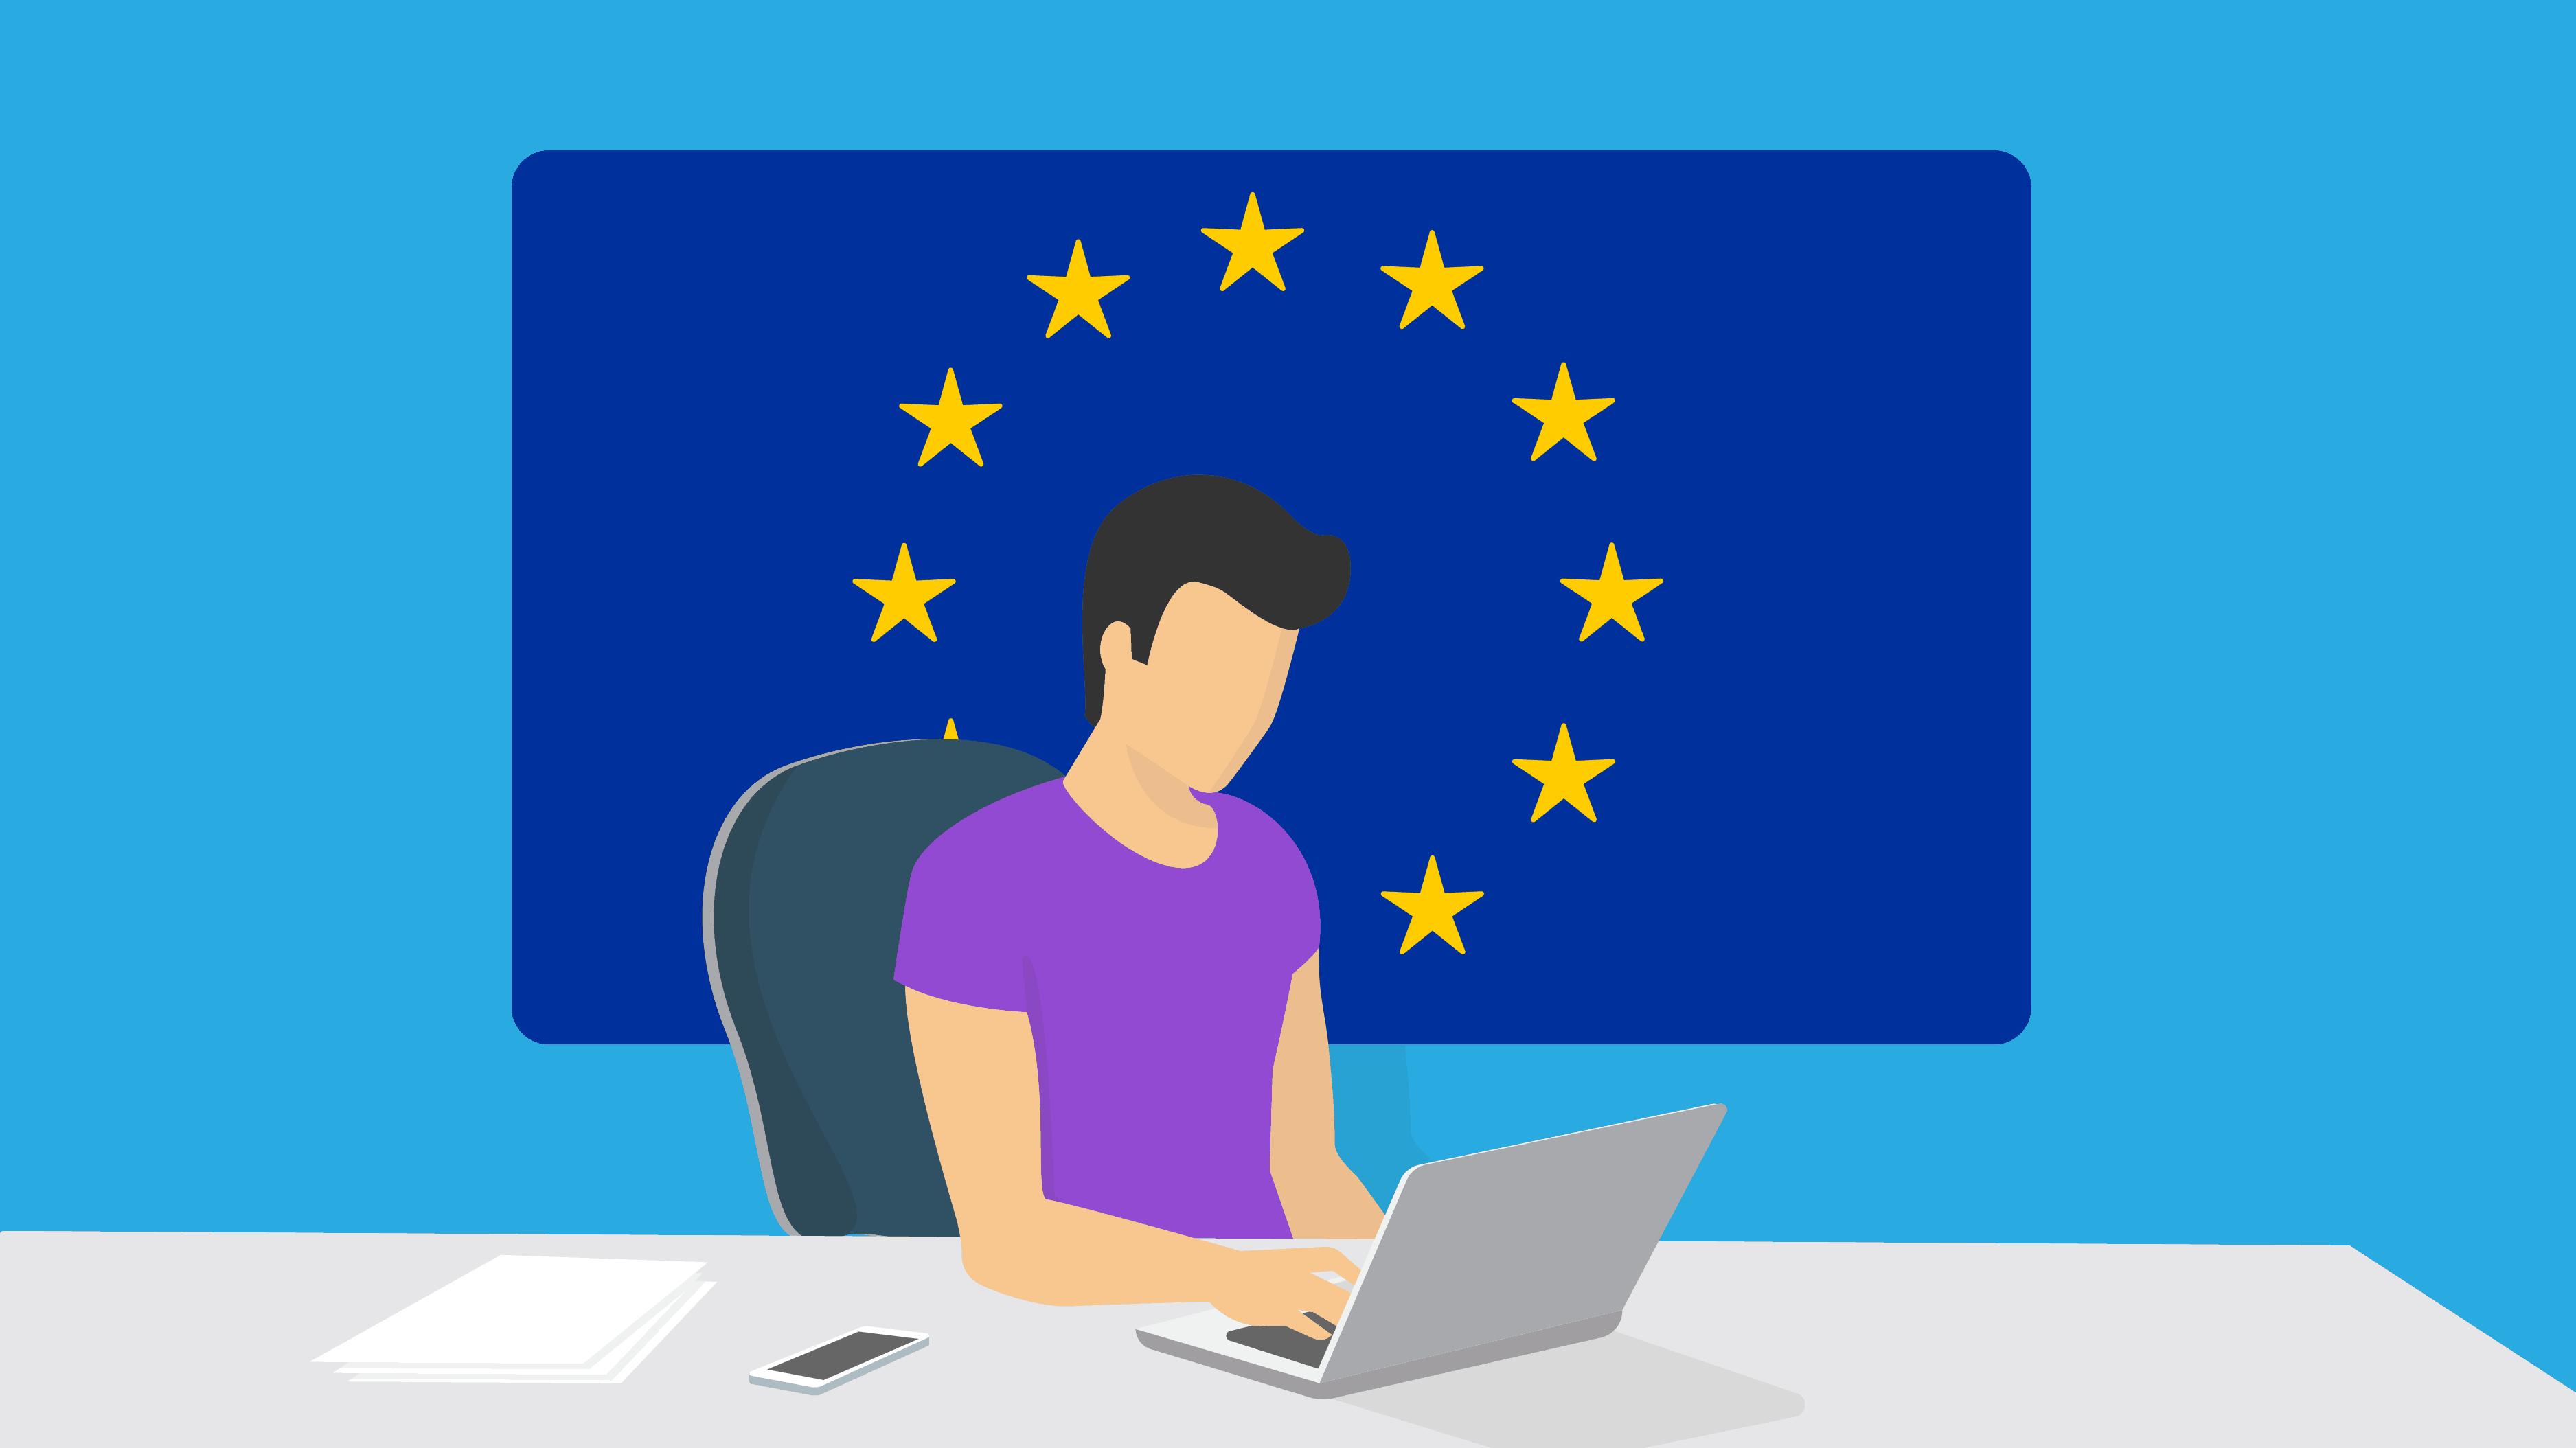 Indeed Flex | Cartoon of person in front of EU flag